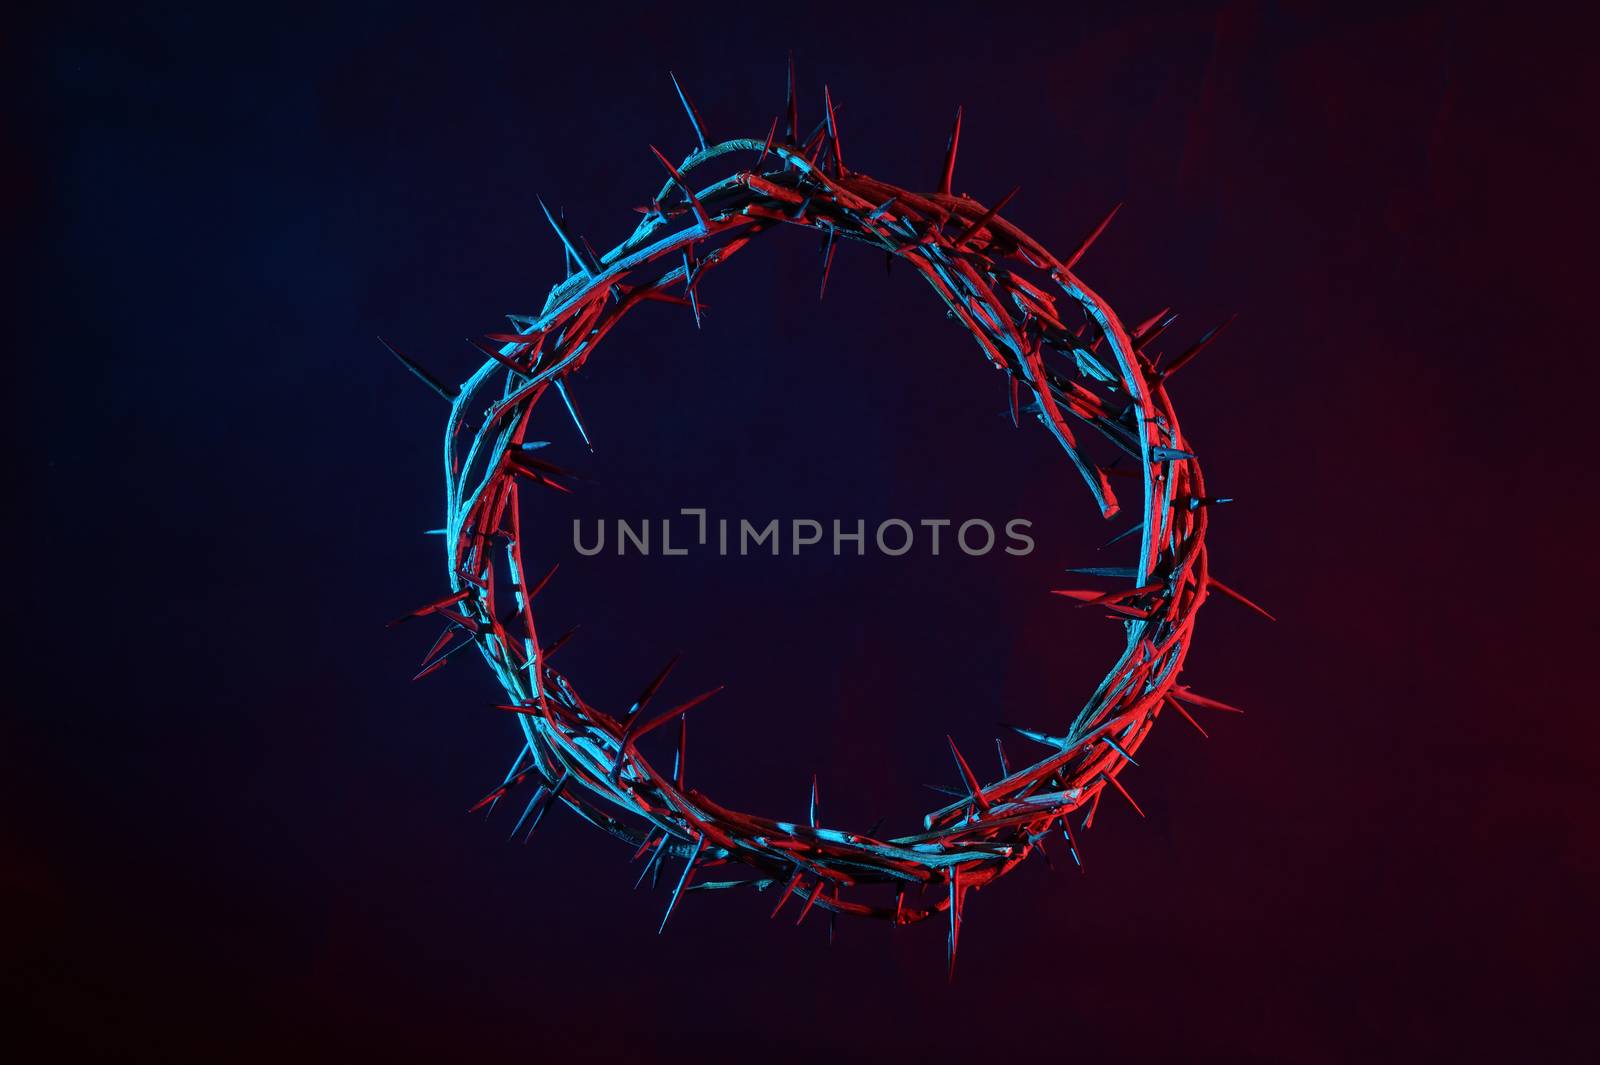 Colored Crown Of Thorns On A Dark Background